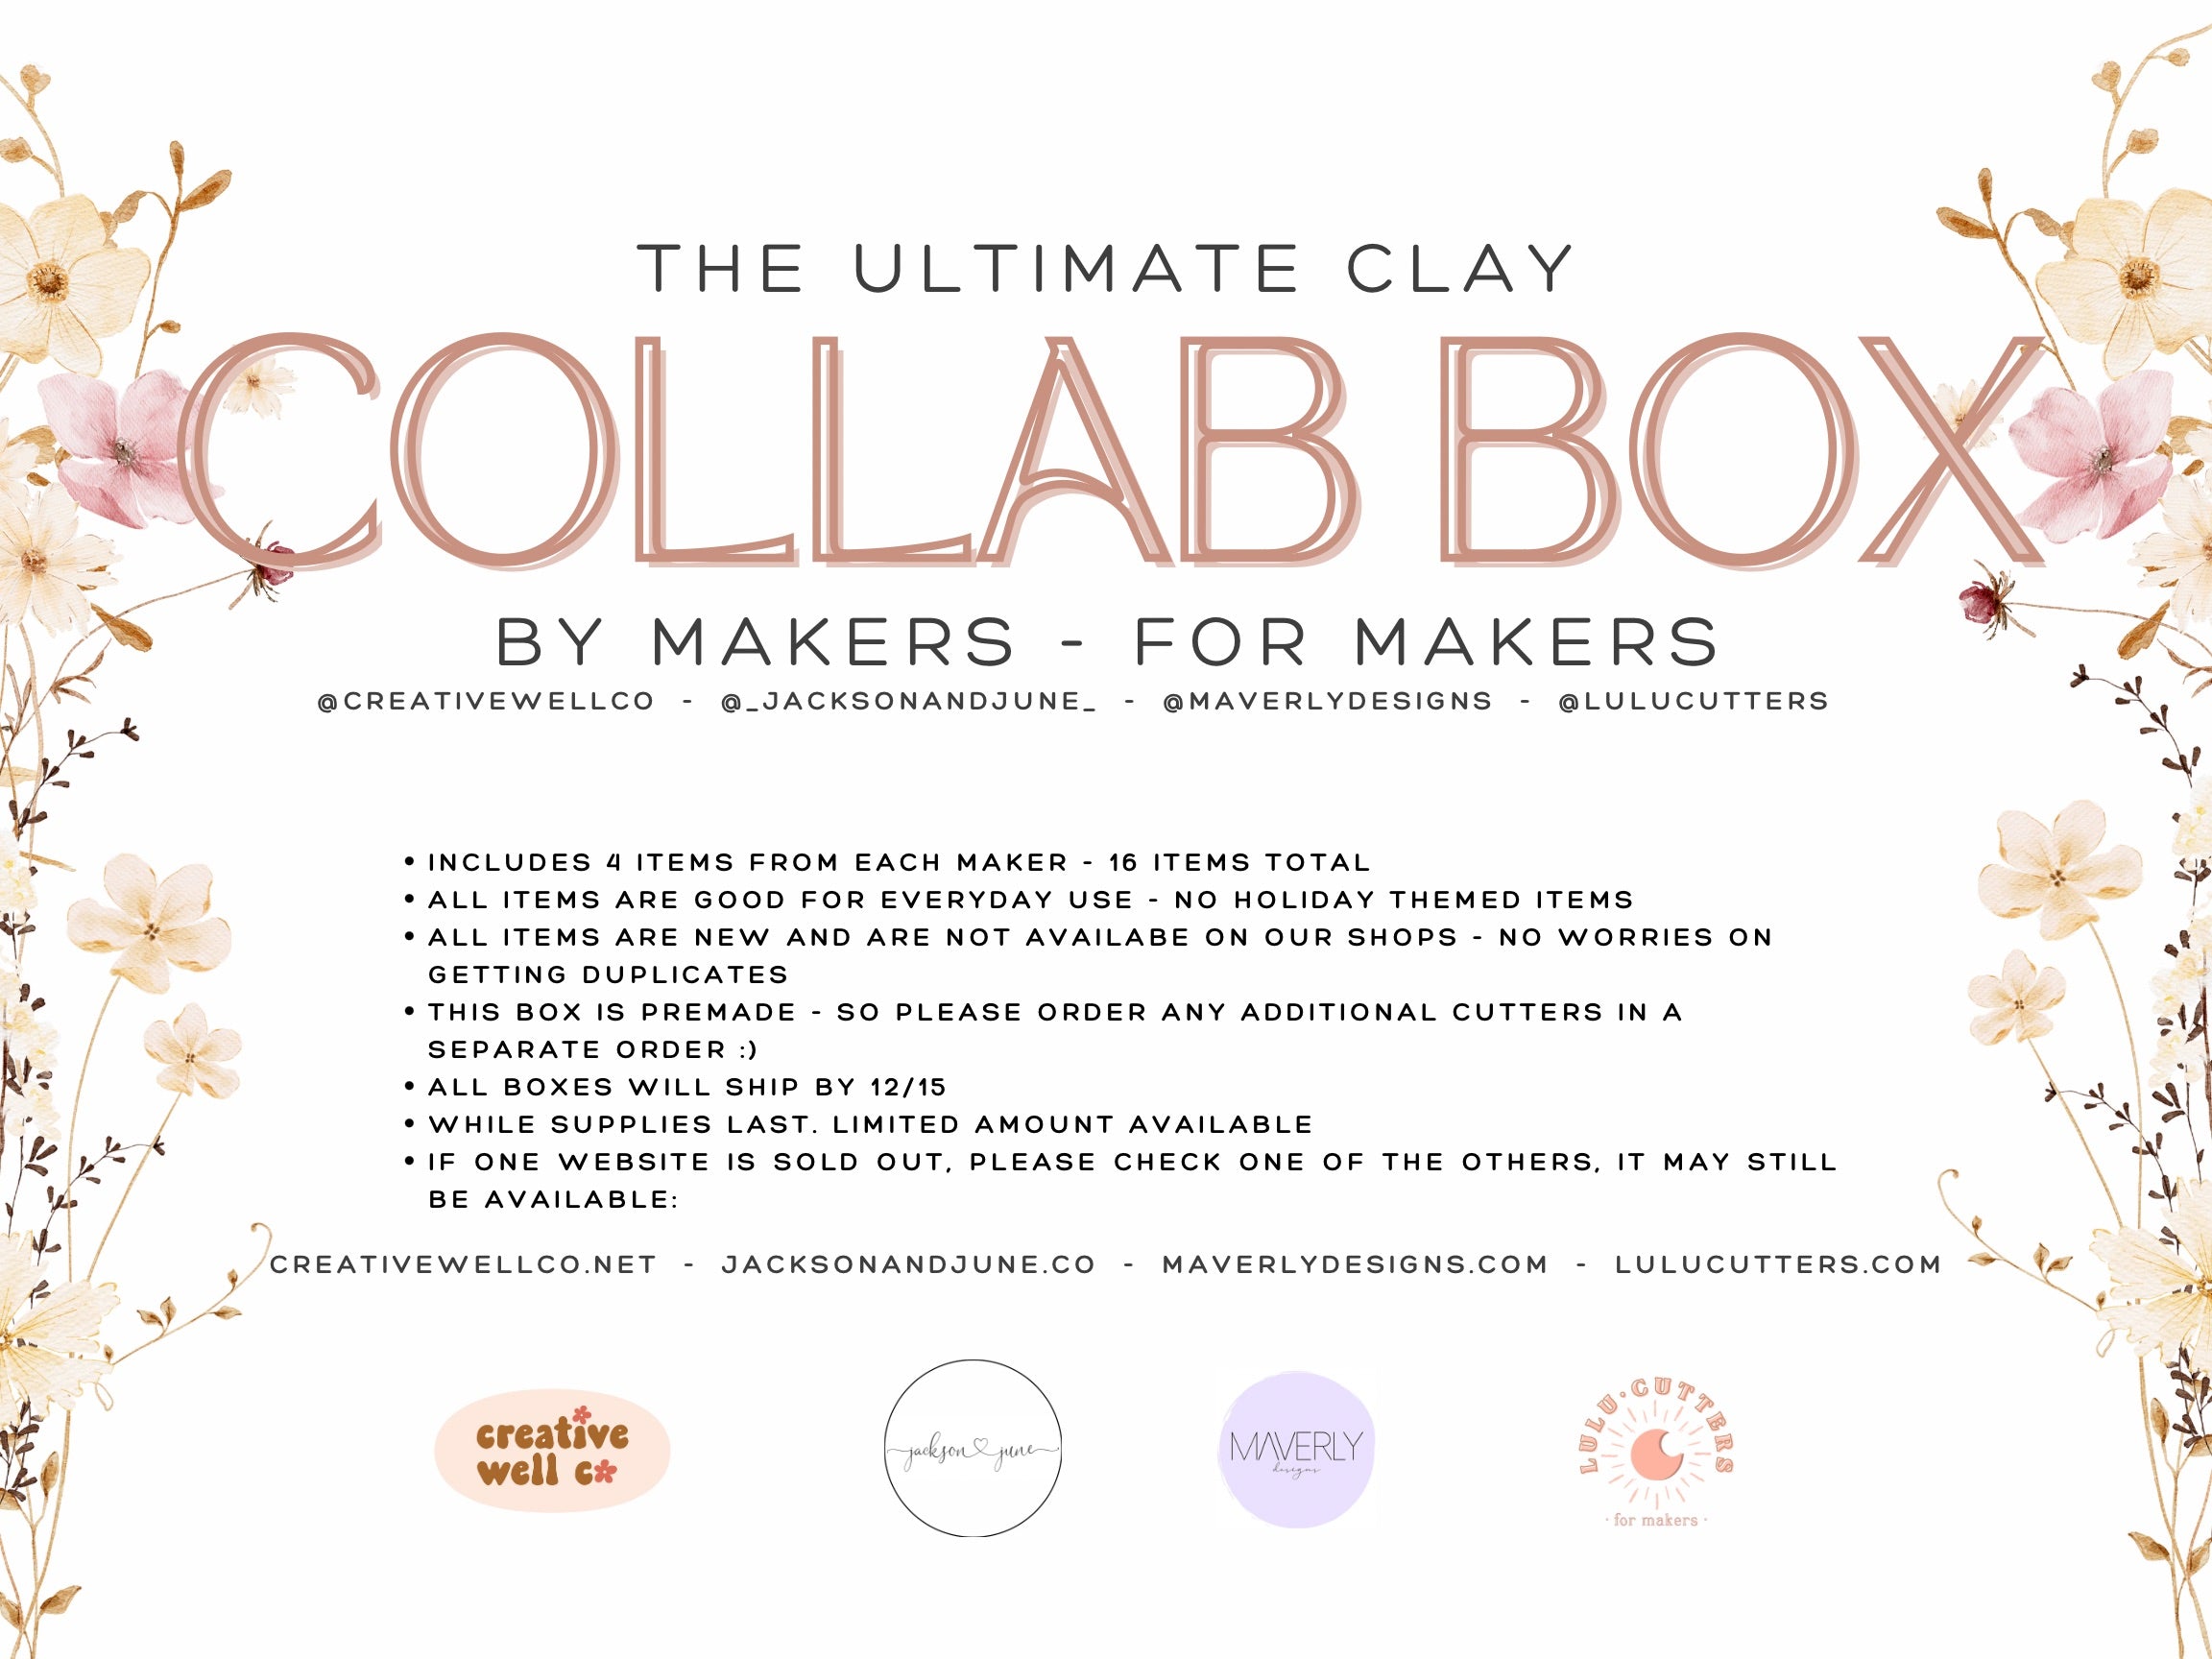 Ultimate Clay Collab Box By Makers For Makers (Maverly Designs, Creativewellco, Lulucutters, and Jackson and June)